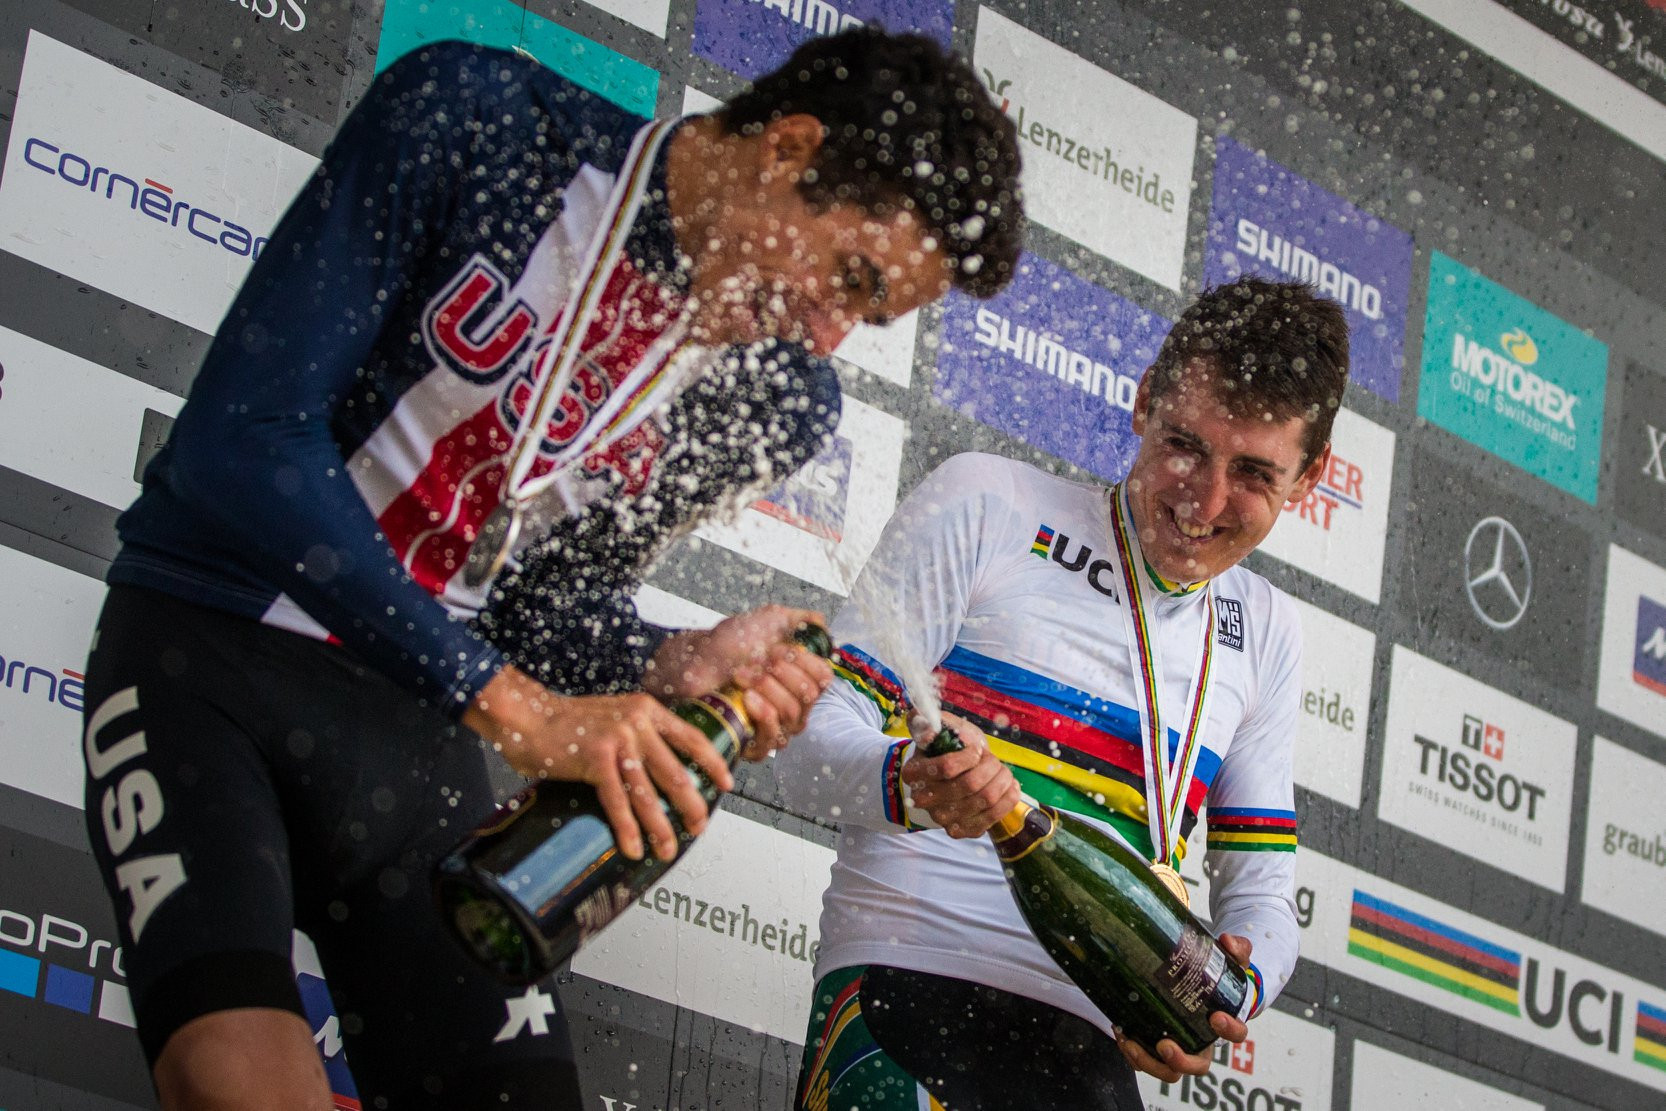 South Africa's Alan Hatherly, right, celebrates victory in the XCO category at the UCI Mountain Bike World Championships in Switzerland ©UCI